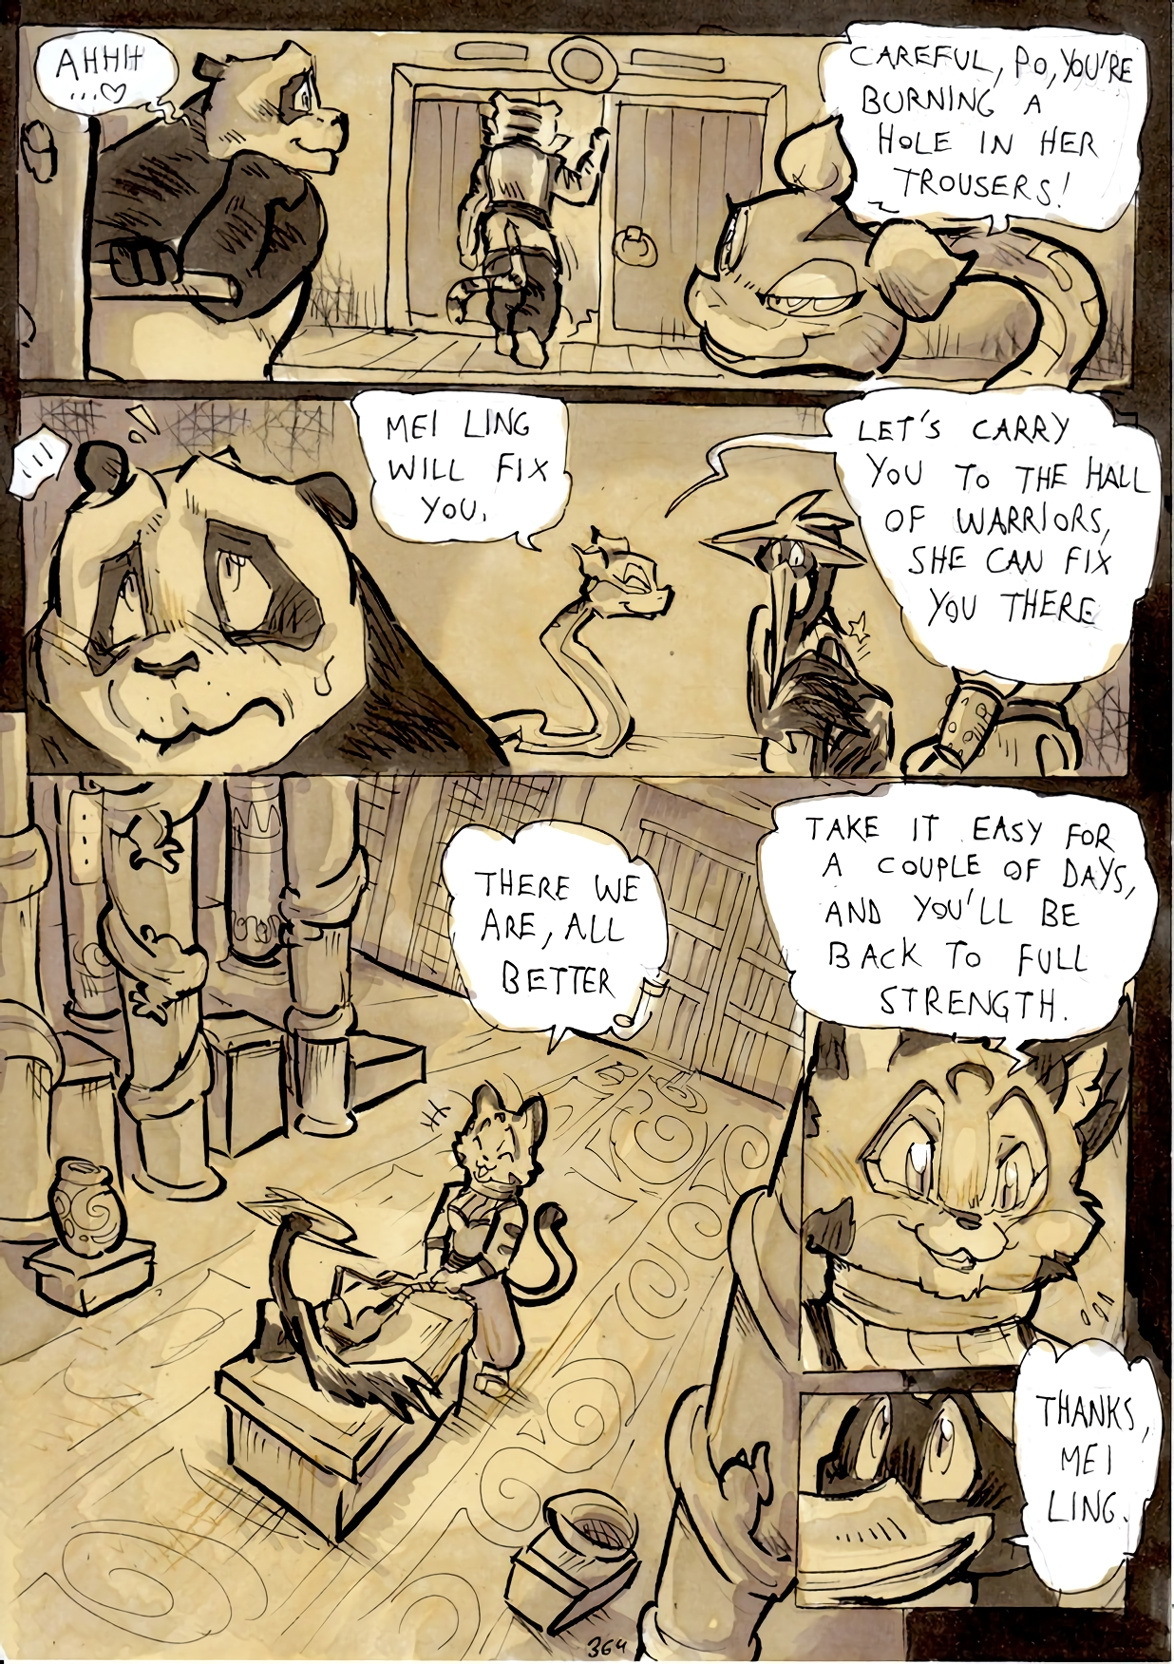 Better Late than Never 3 - Page 69